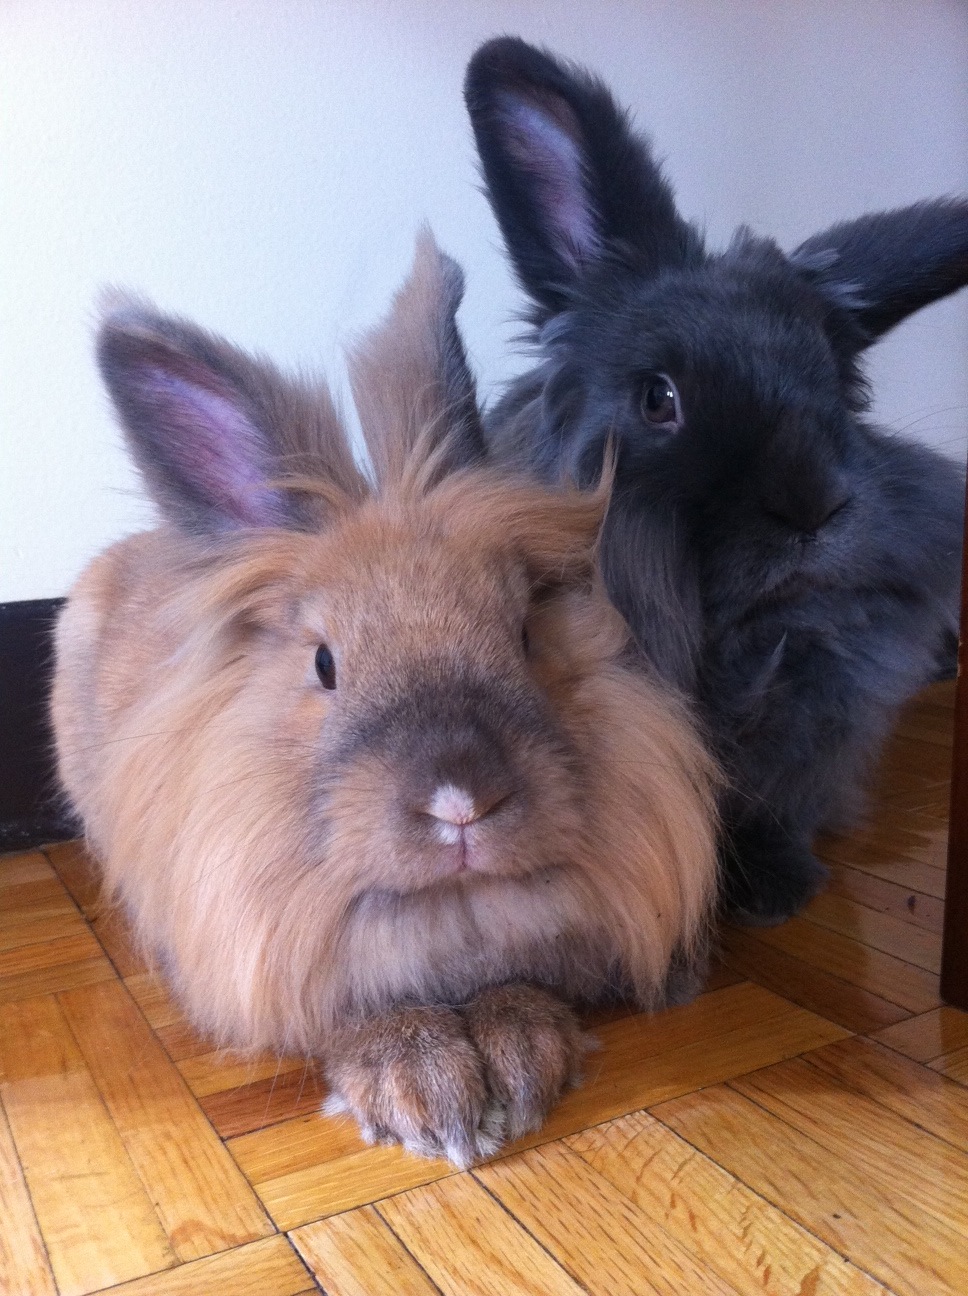 Best Friend Bunnies Live Separately But Spend Their Vacations Together